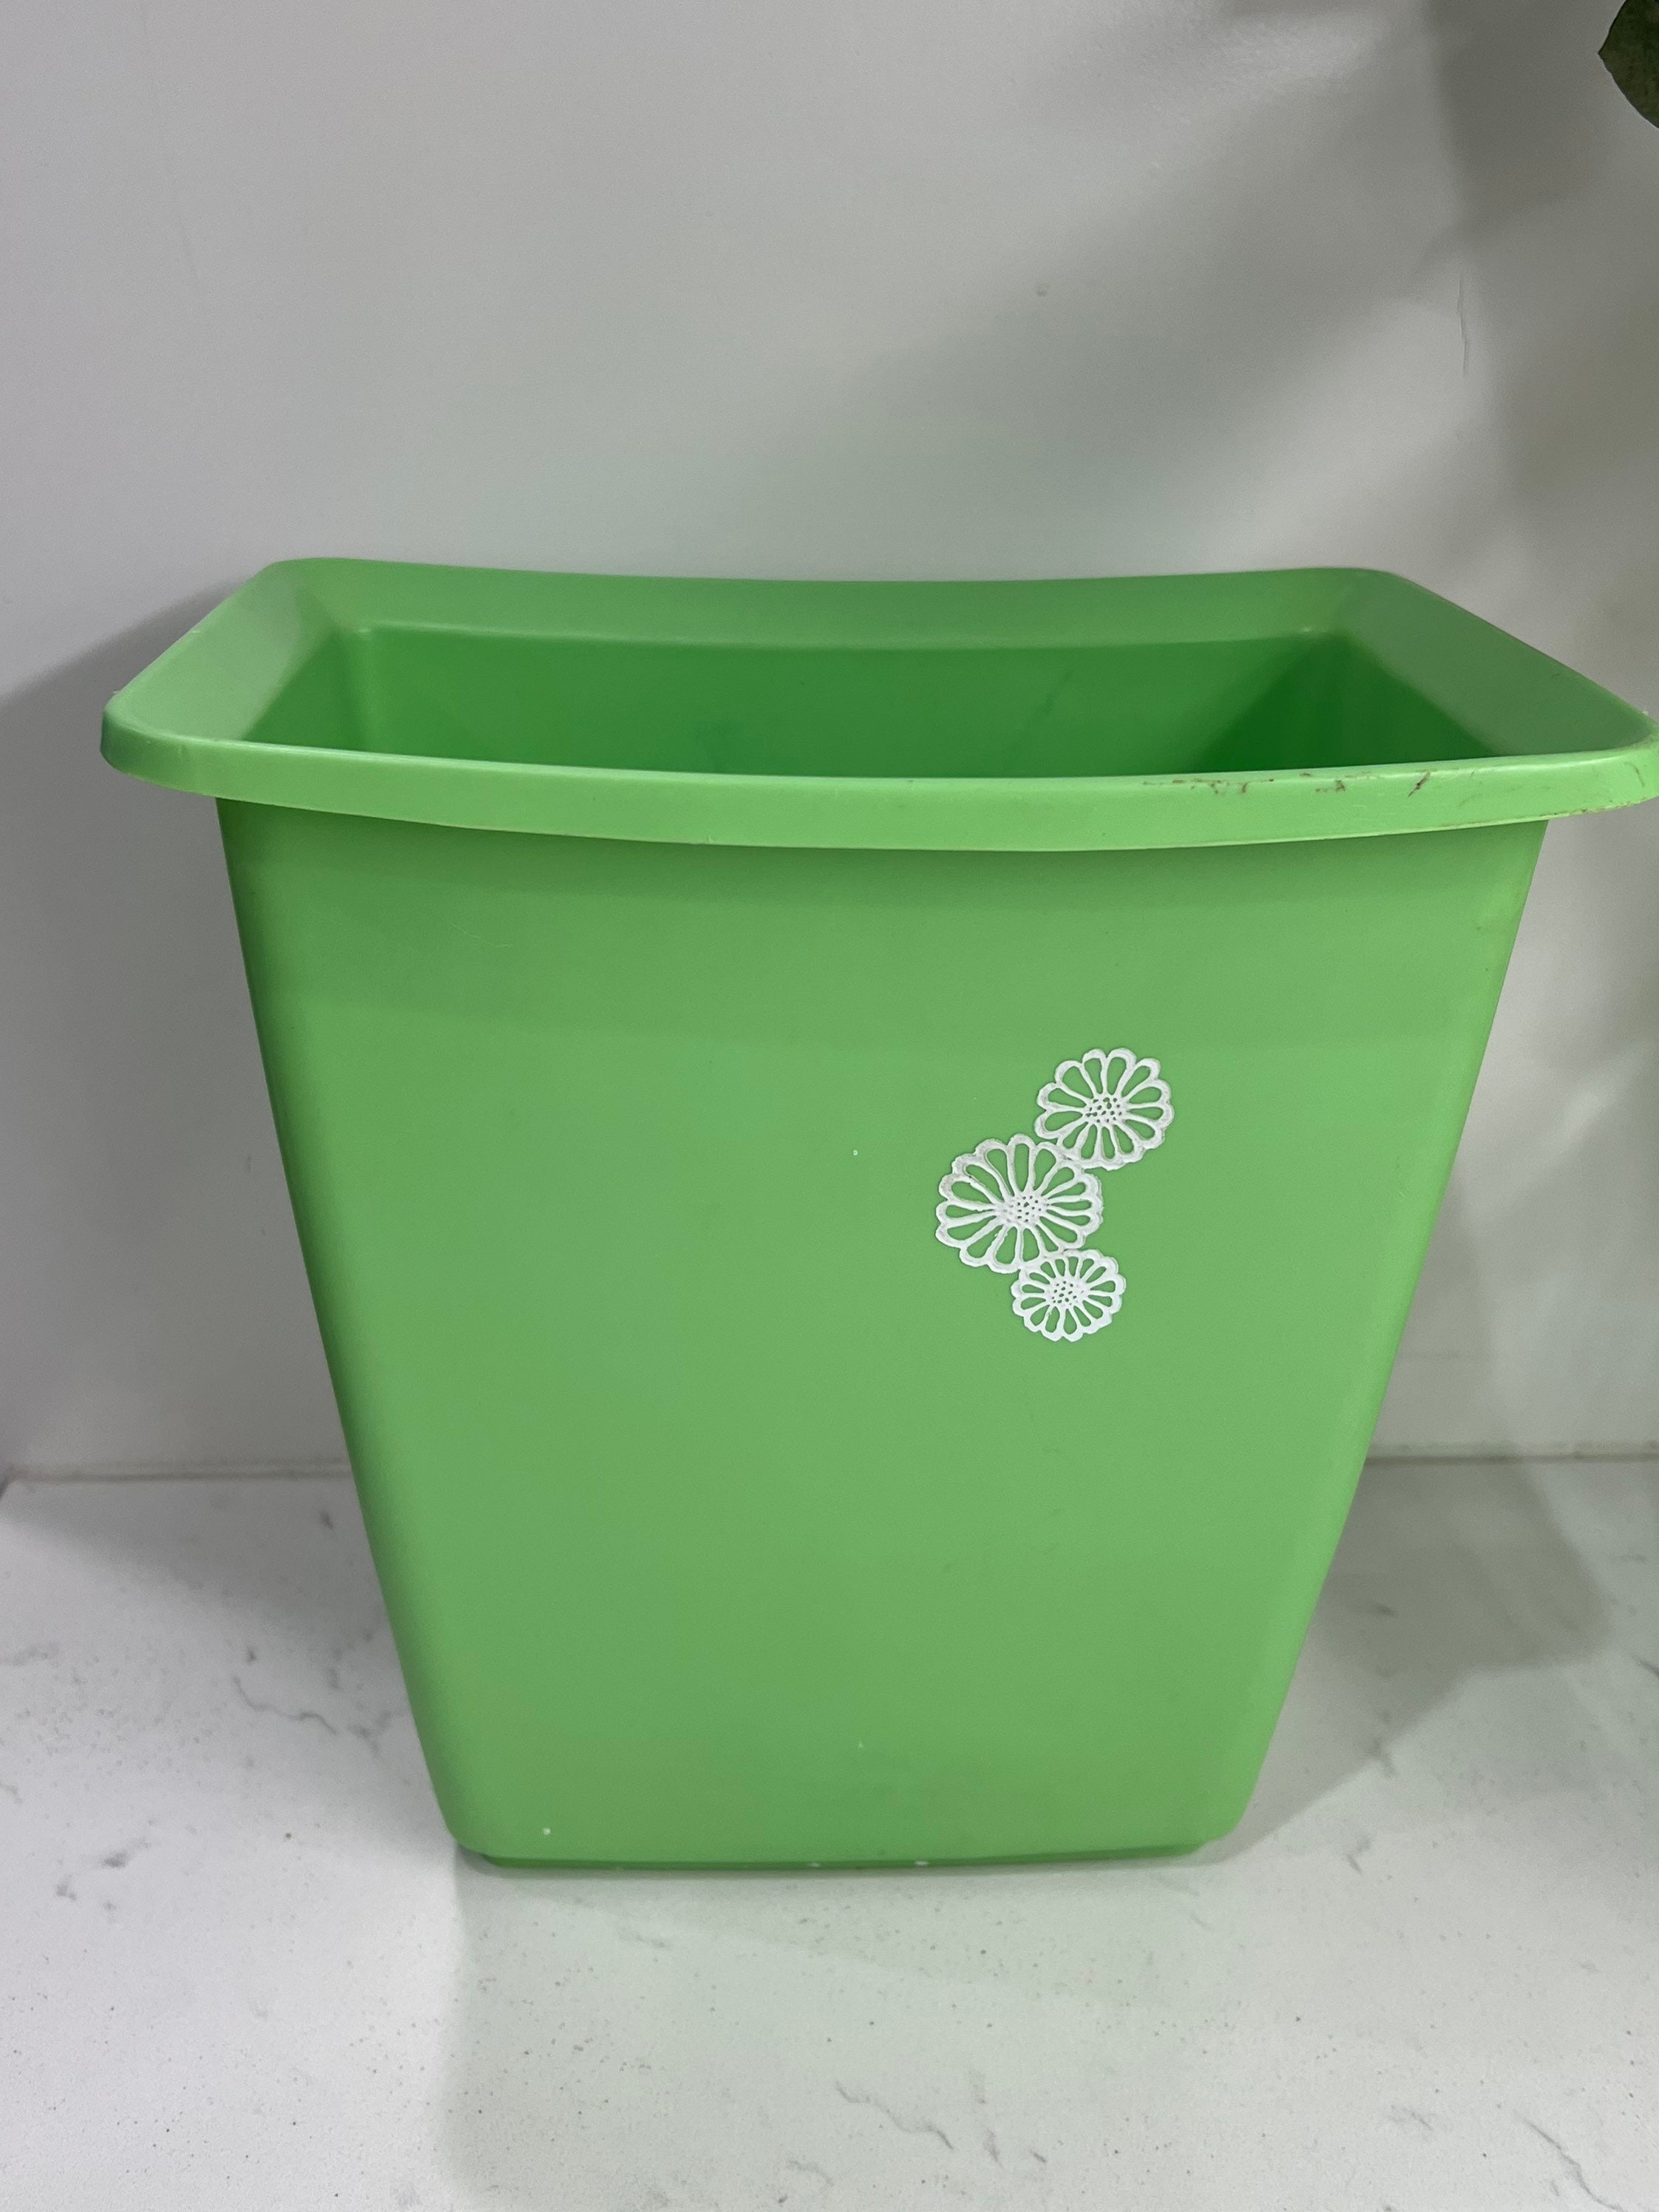 Vintage Rubbermaid Plastic Trash Can Yellow With White Flowers 